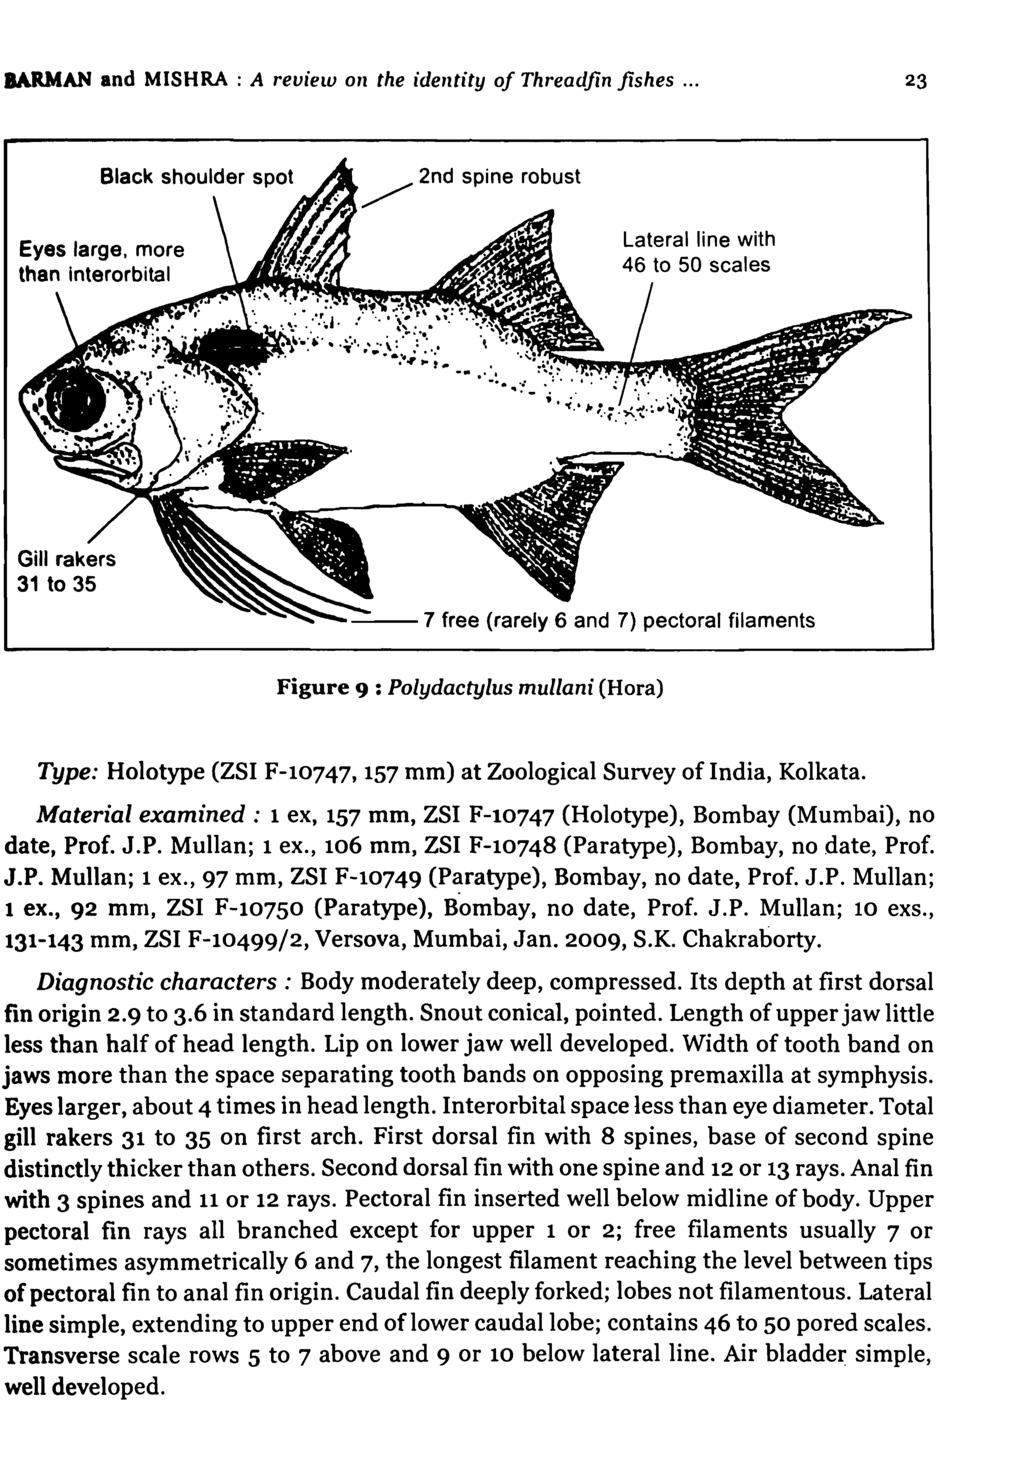 &ARMAN and MISHRA : A revielu on the identity of Threadfin fishes... 23 /,,2nd spine robust Eyes large, more than interorbital Lateral line with 46 to 50 scales. - '~", '. \ :.. \ V / ".'.~:. ~'...."_~.